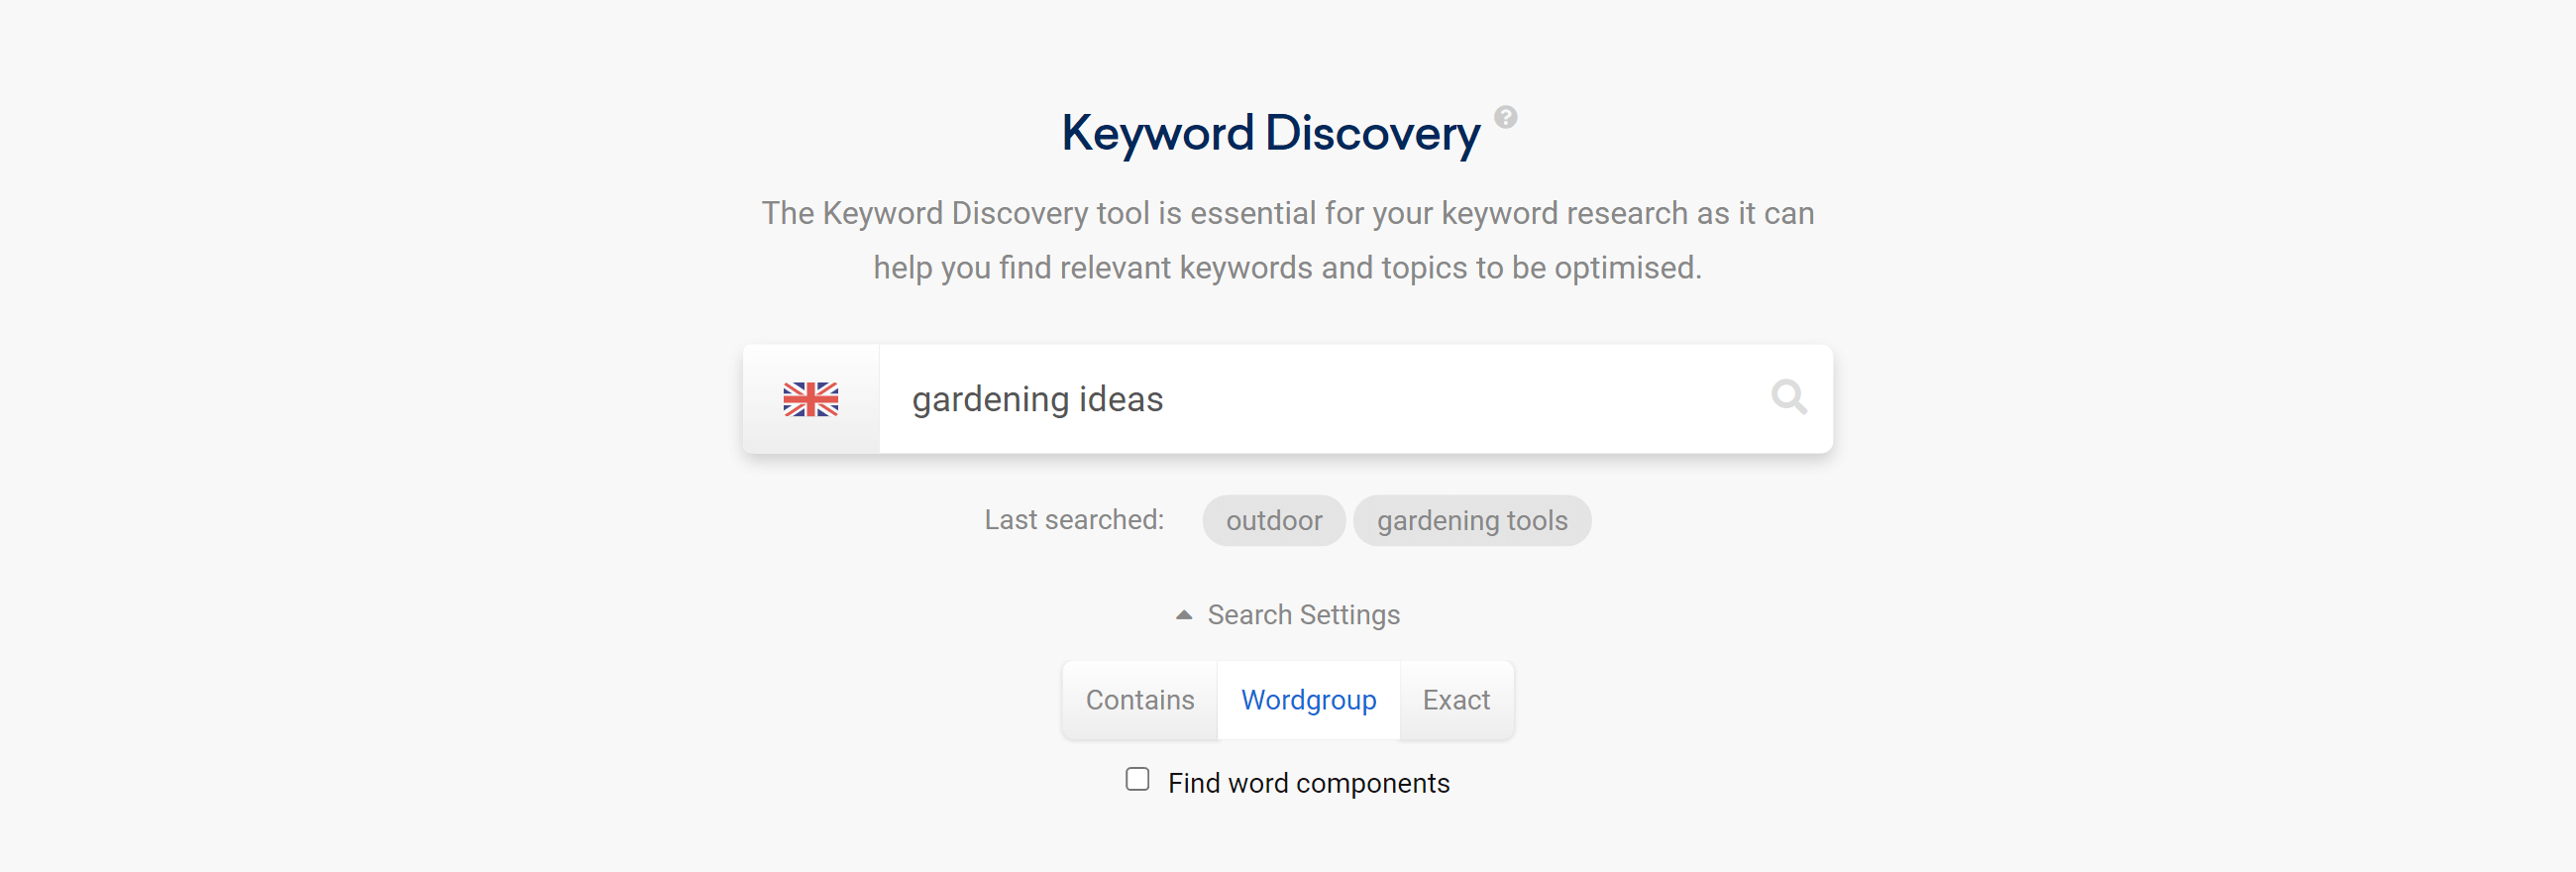 The Keyword Discovery tool